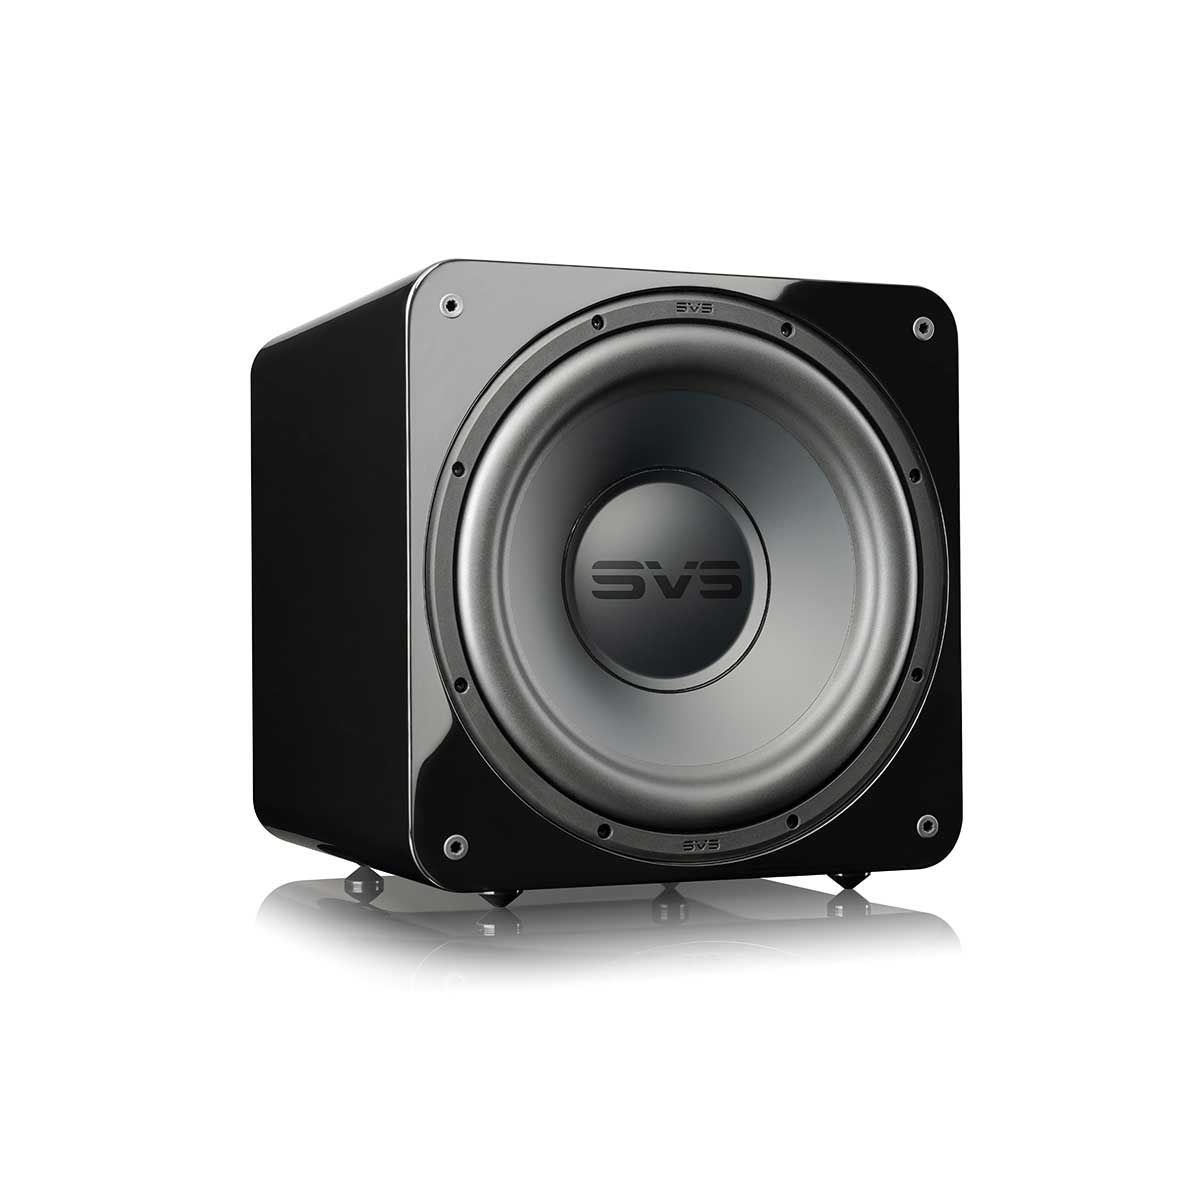 SVS SB-1000 Pro Series Subwoofer in Piano Black